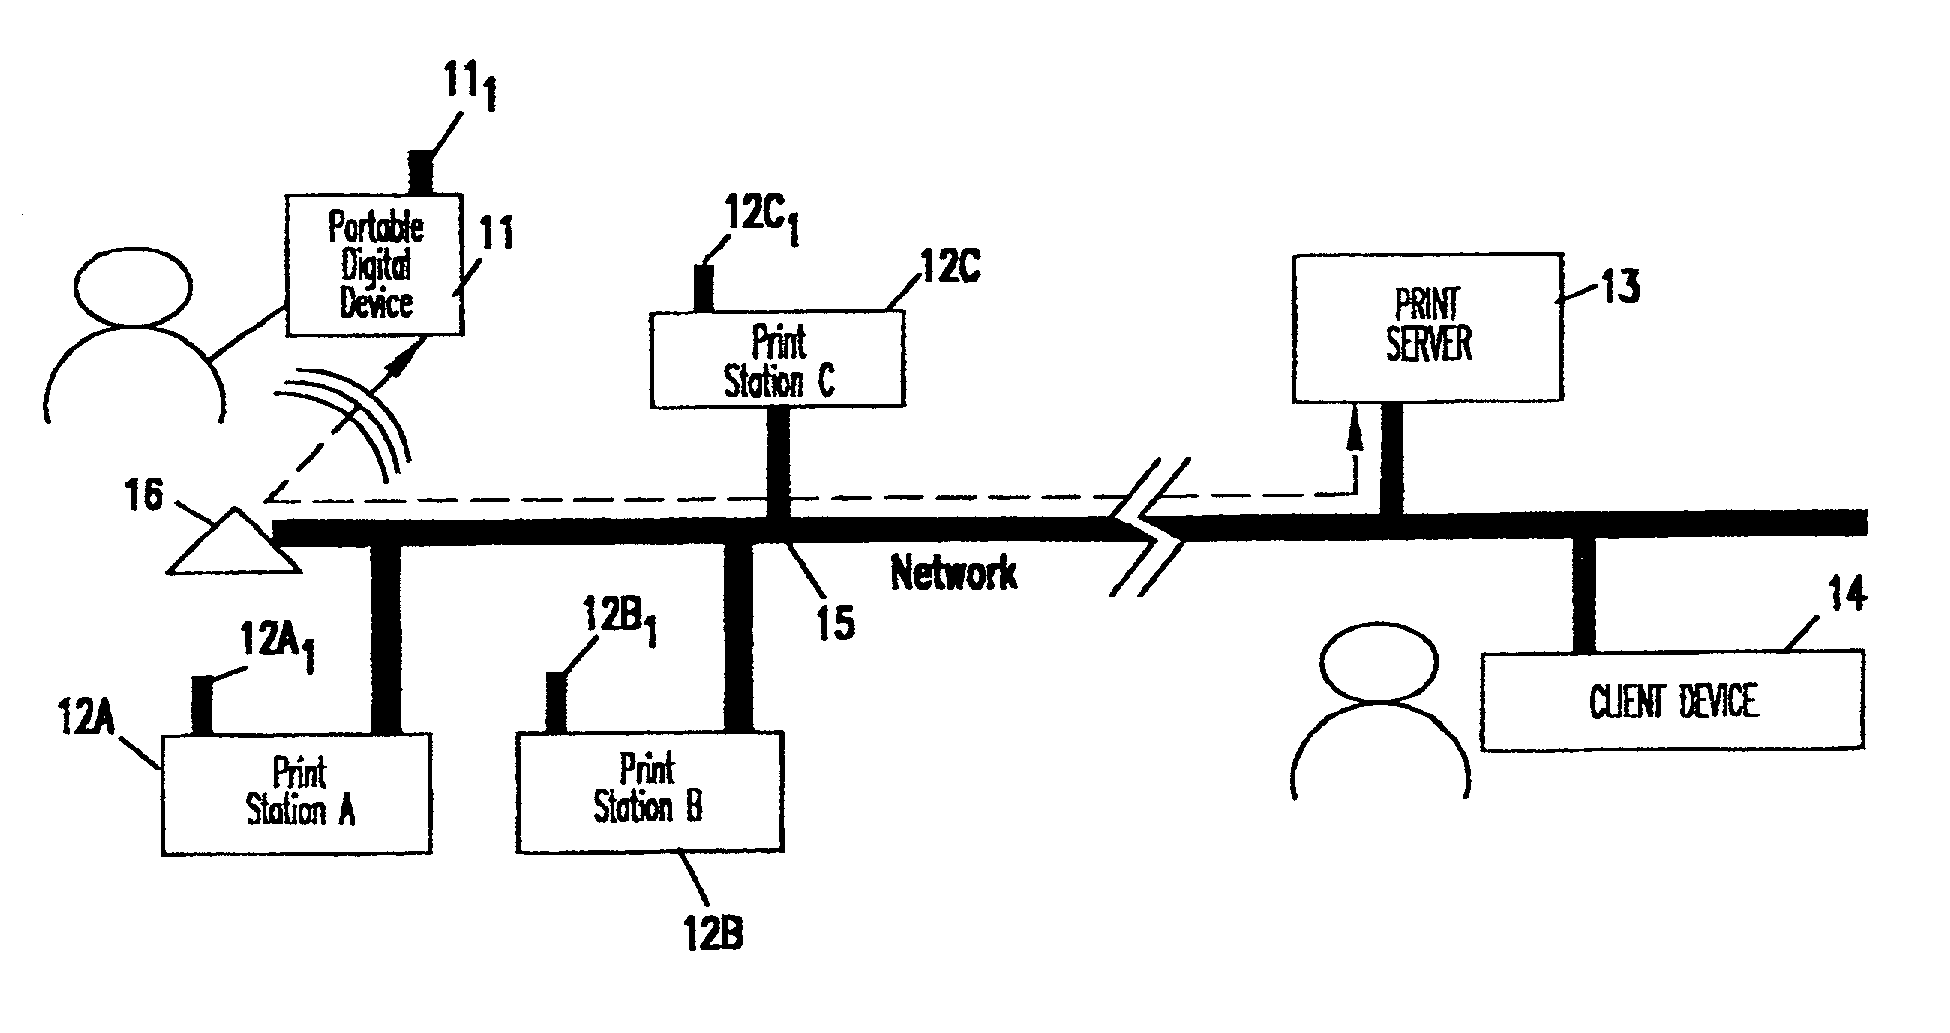 System and method of selectively Printing at remote printers via portable digital device